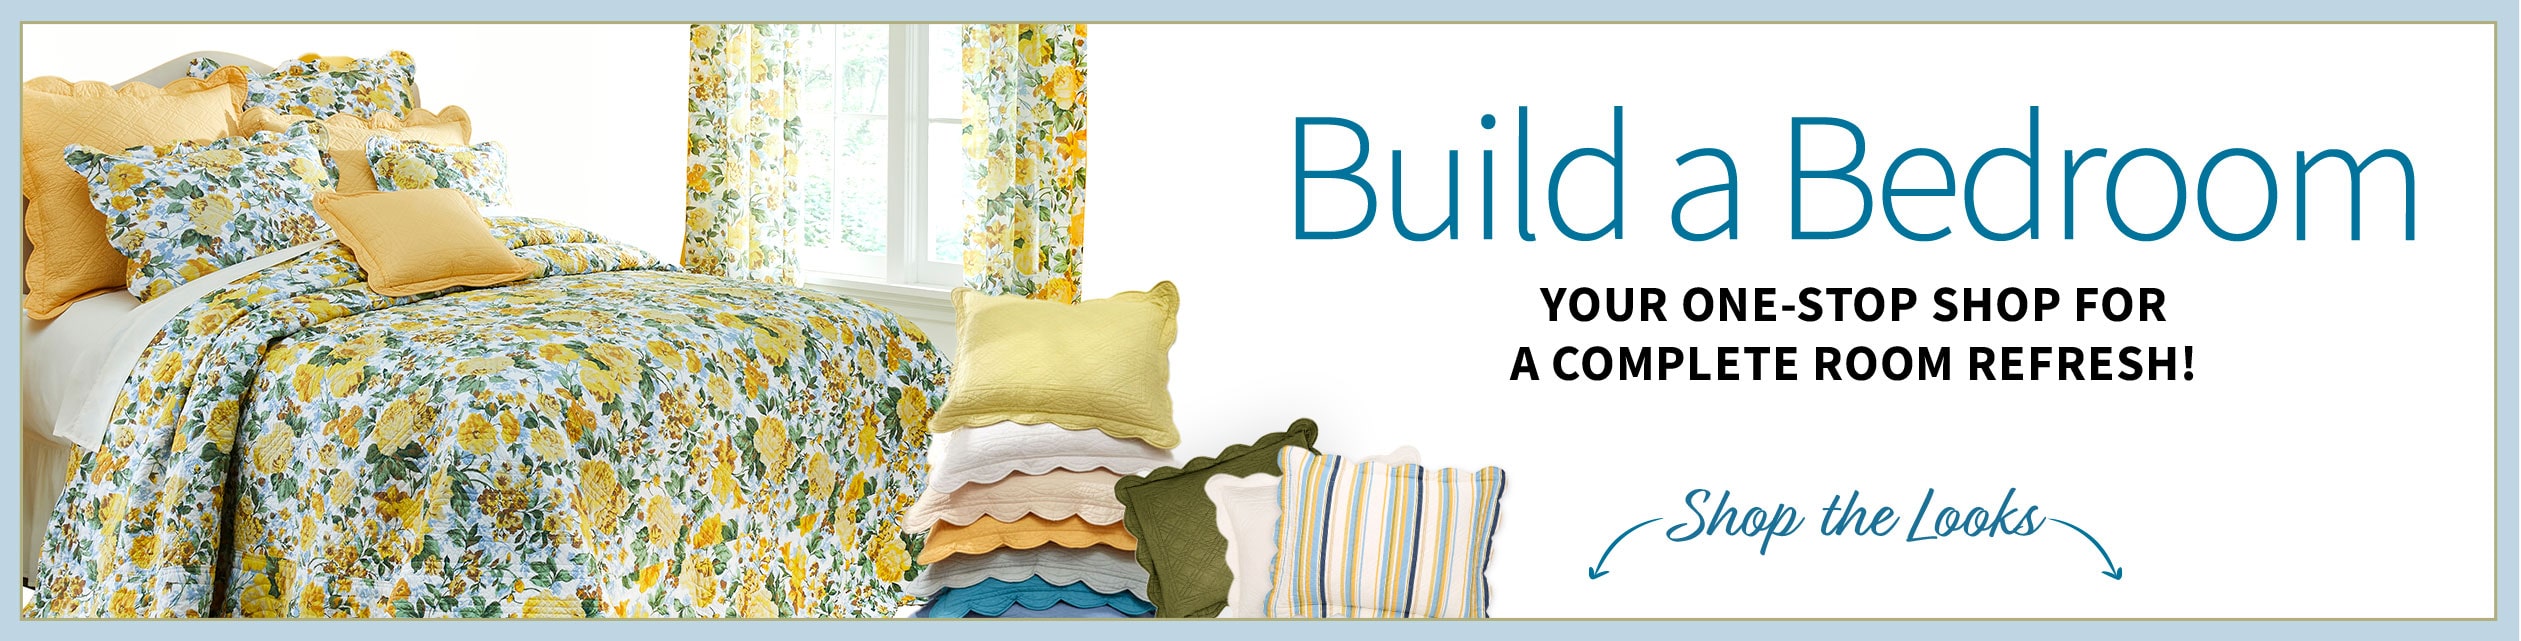 BrylaneHome Build a Bedroom your one-stop-shop for a complete room refresh